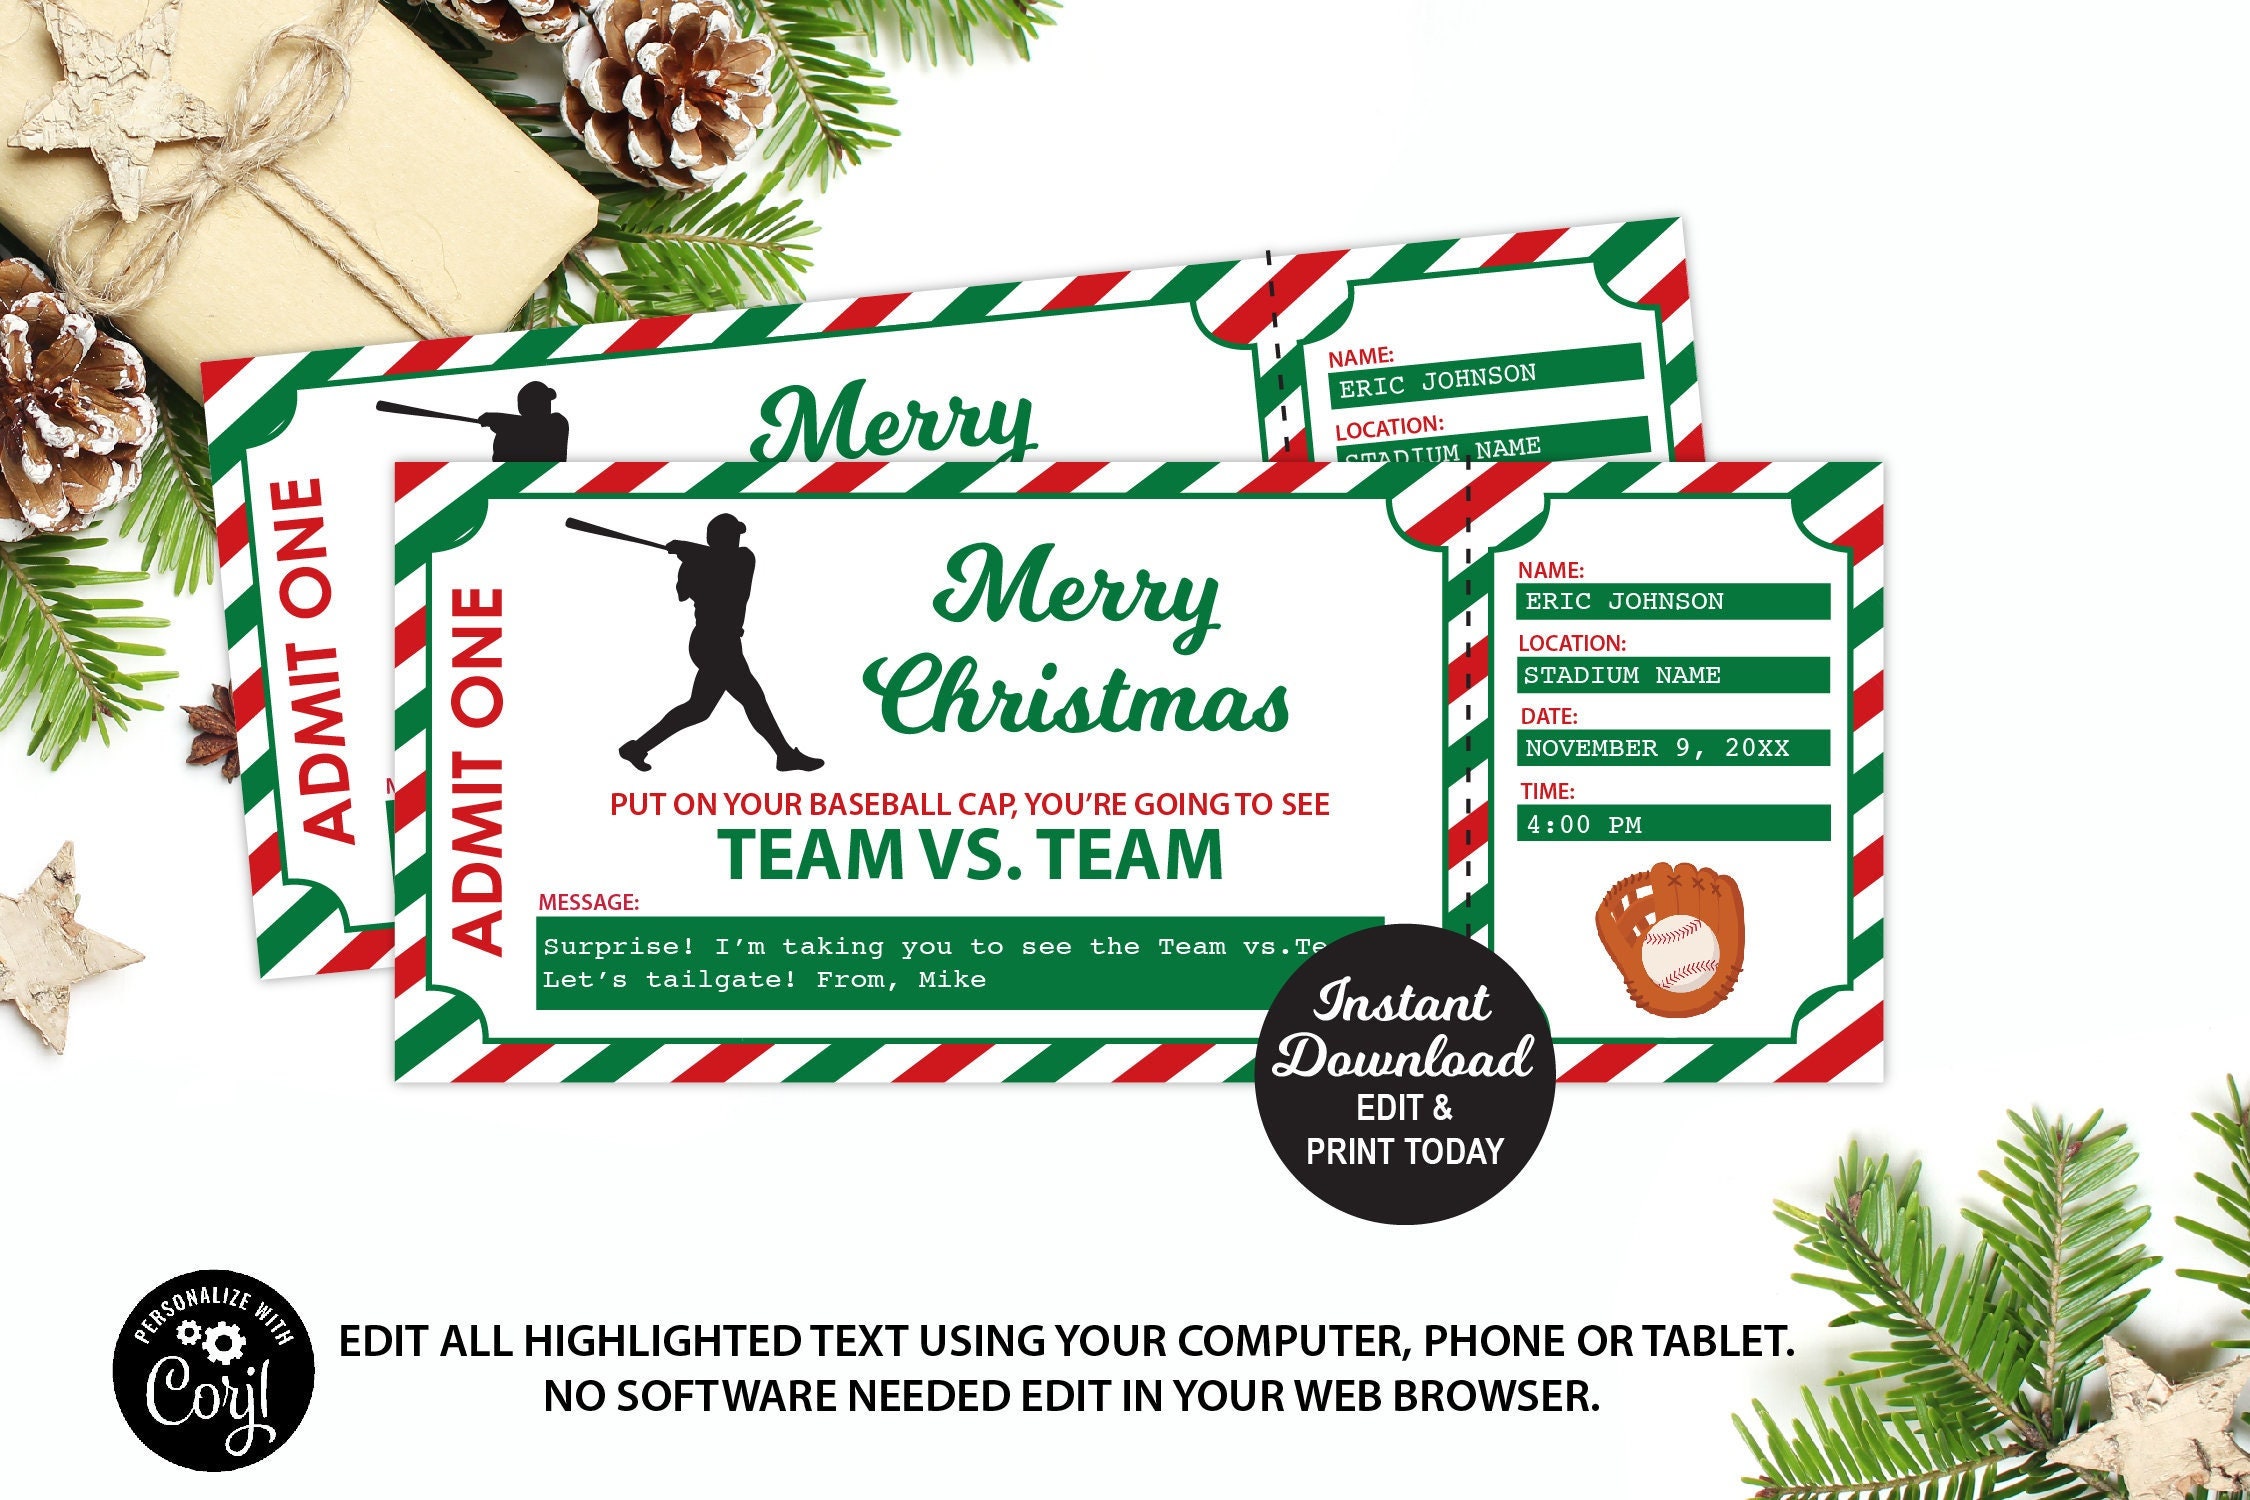 Christmas Basketball Ticket Gift Template - Printable Surprise Ticket to a  Basketball Game Voucher Certificate - INSTANT DOWNLOAD - EDITABLE